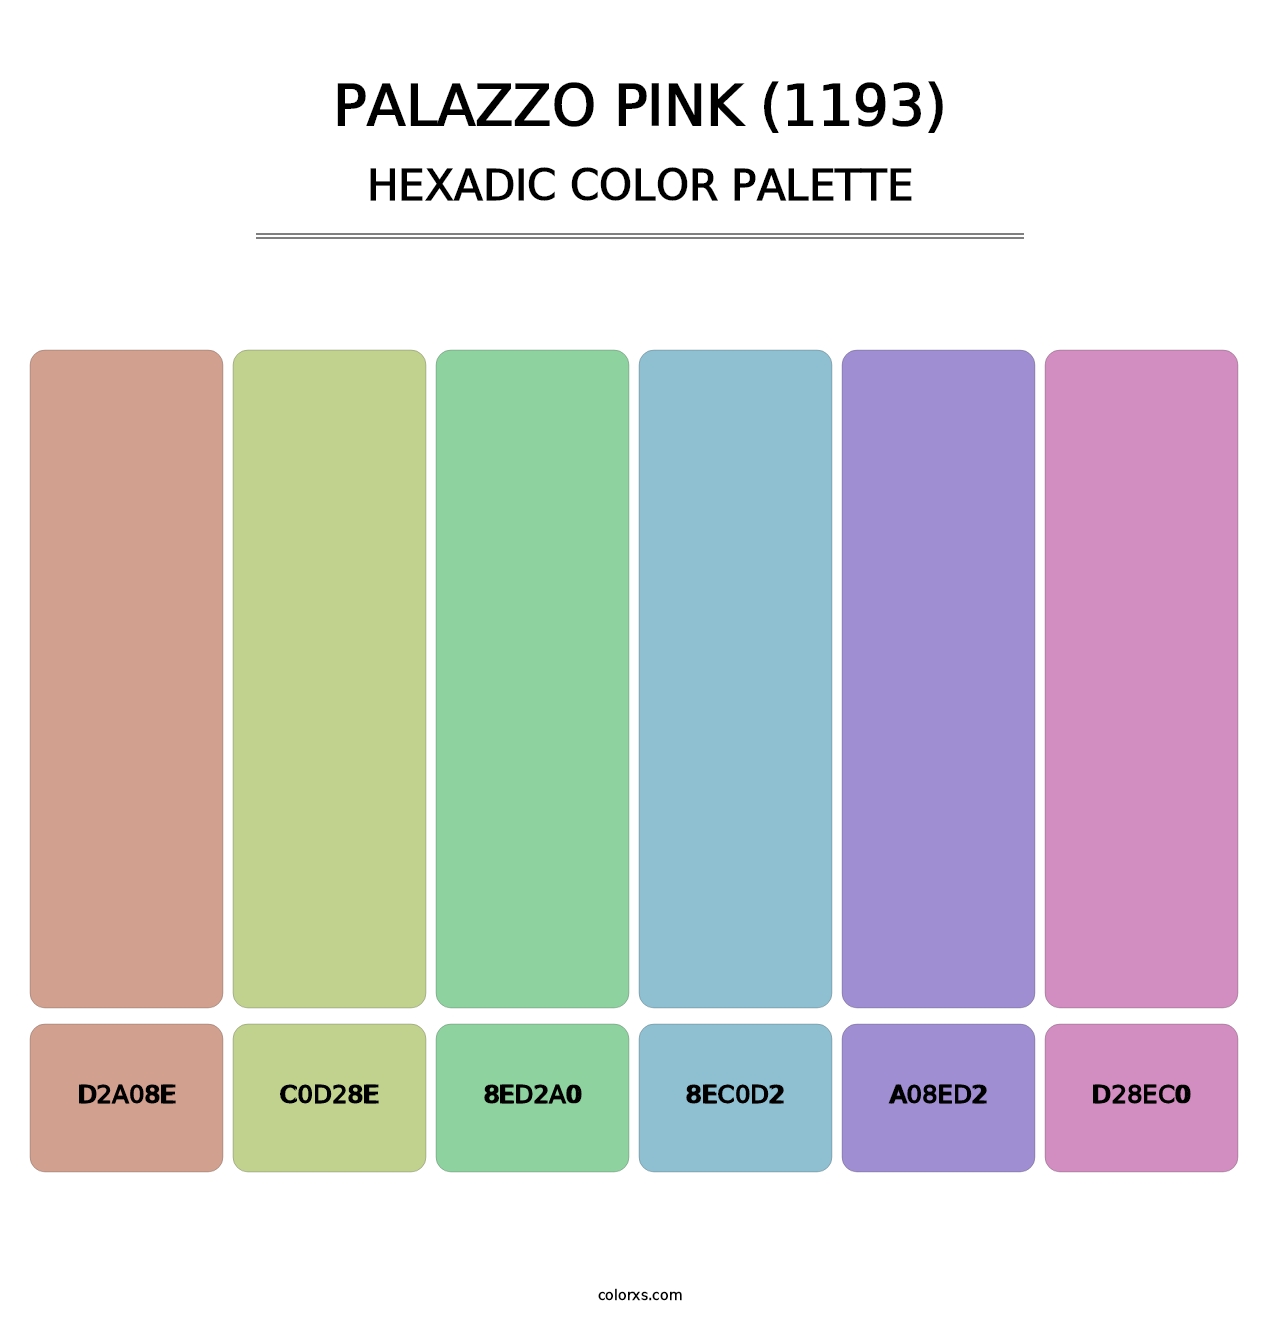 Palazzo Pink (1193) - Hexadic Color Palette